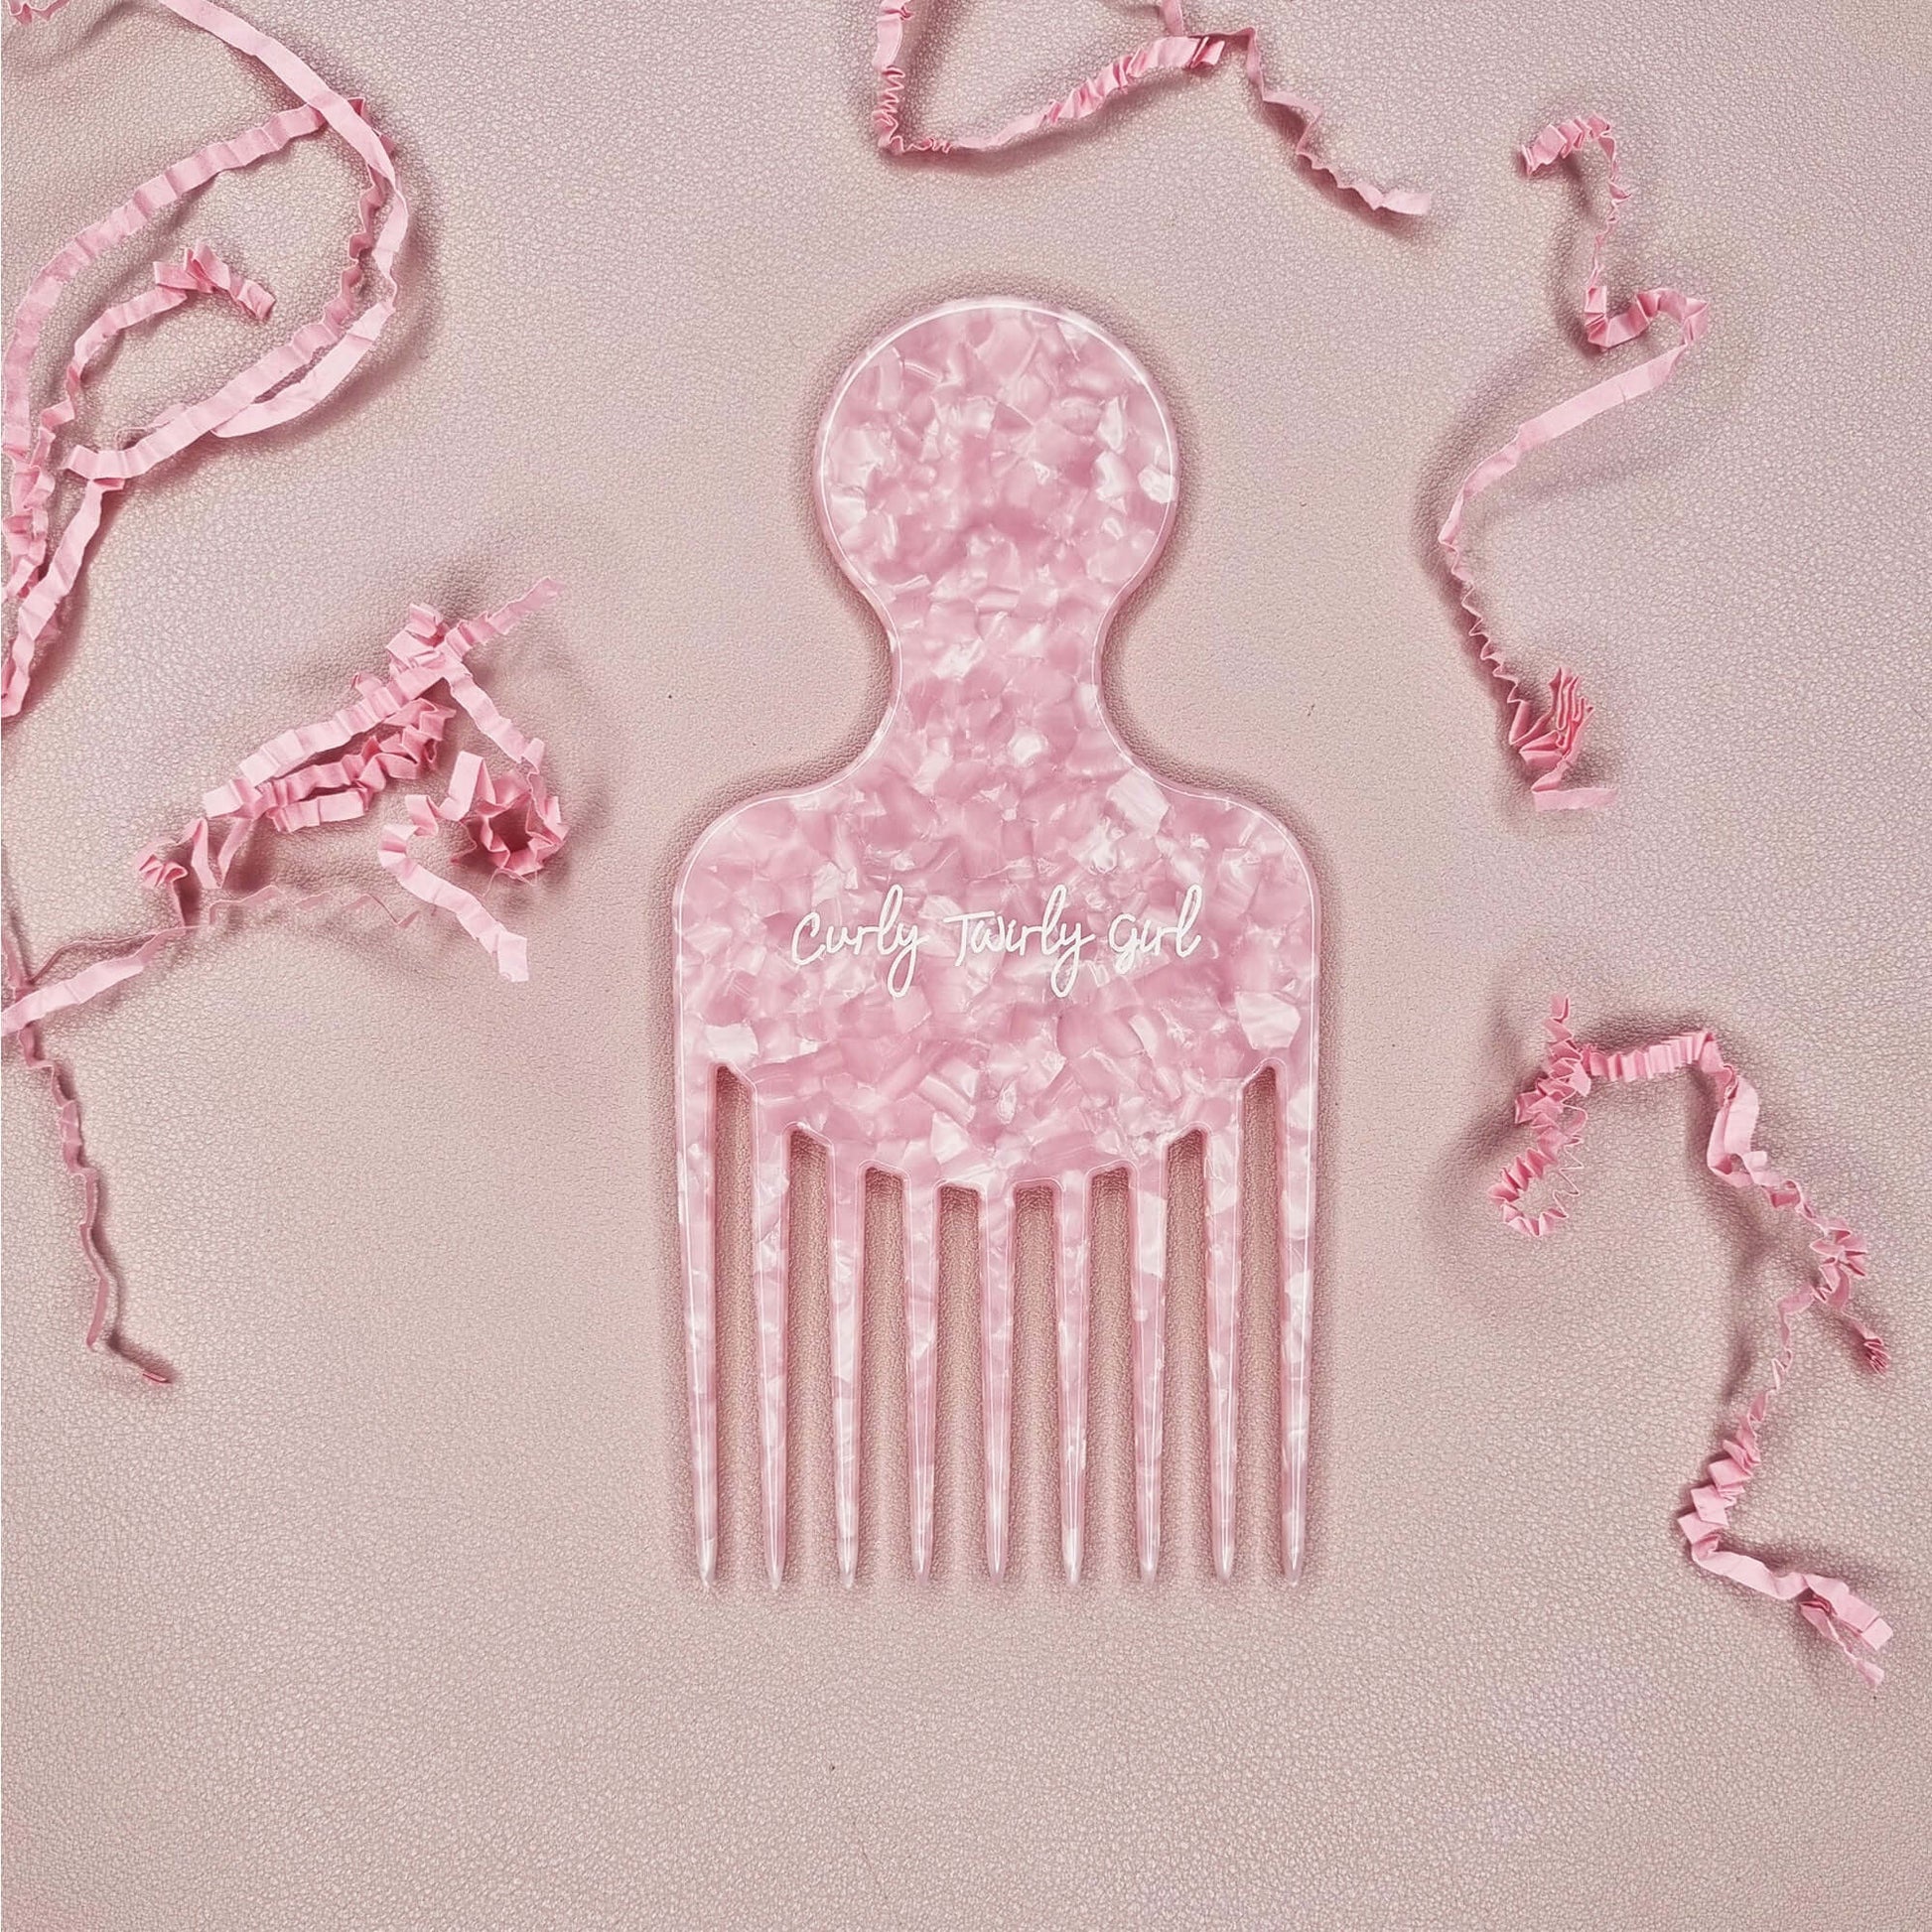 Pink afro hair comb on pink table